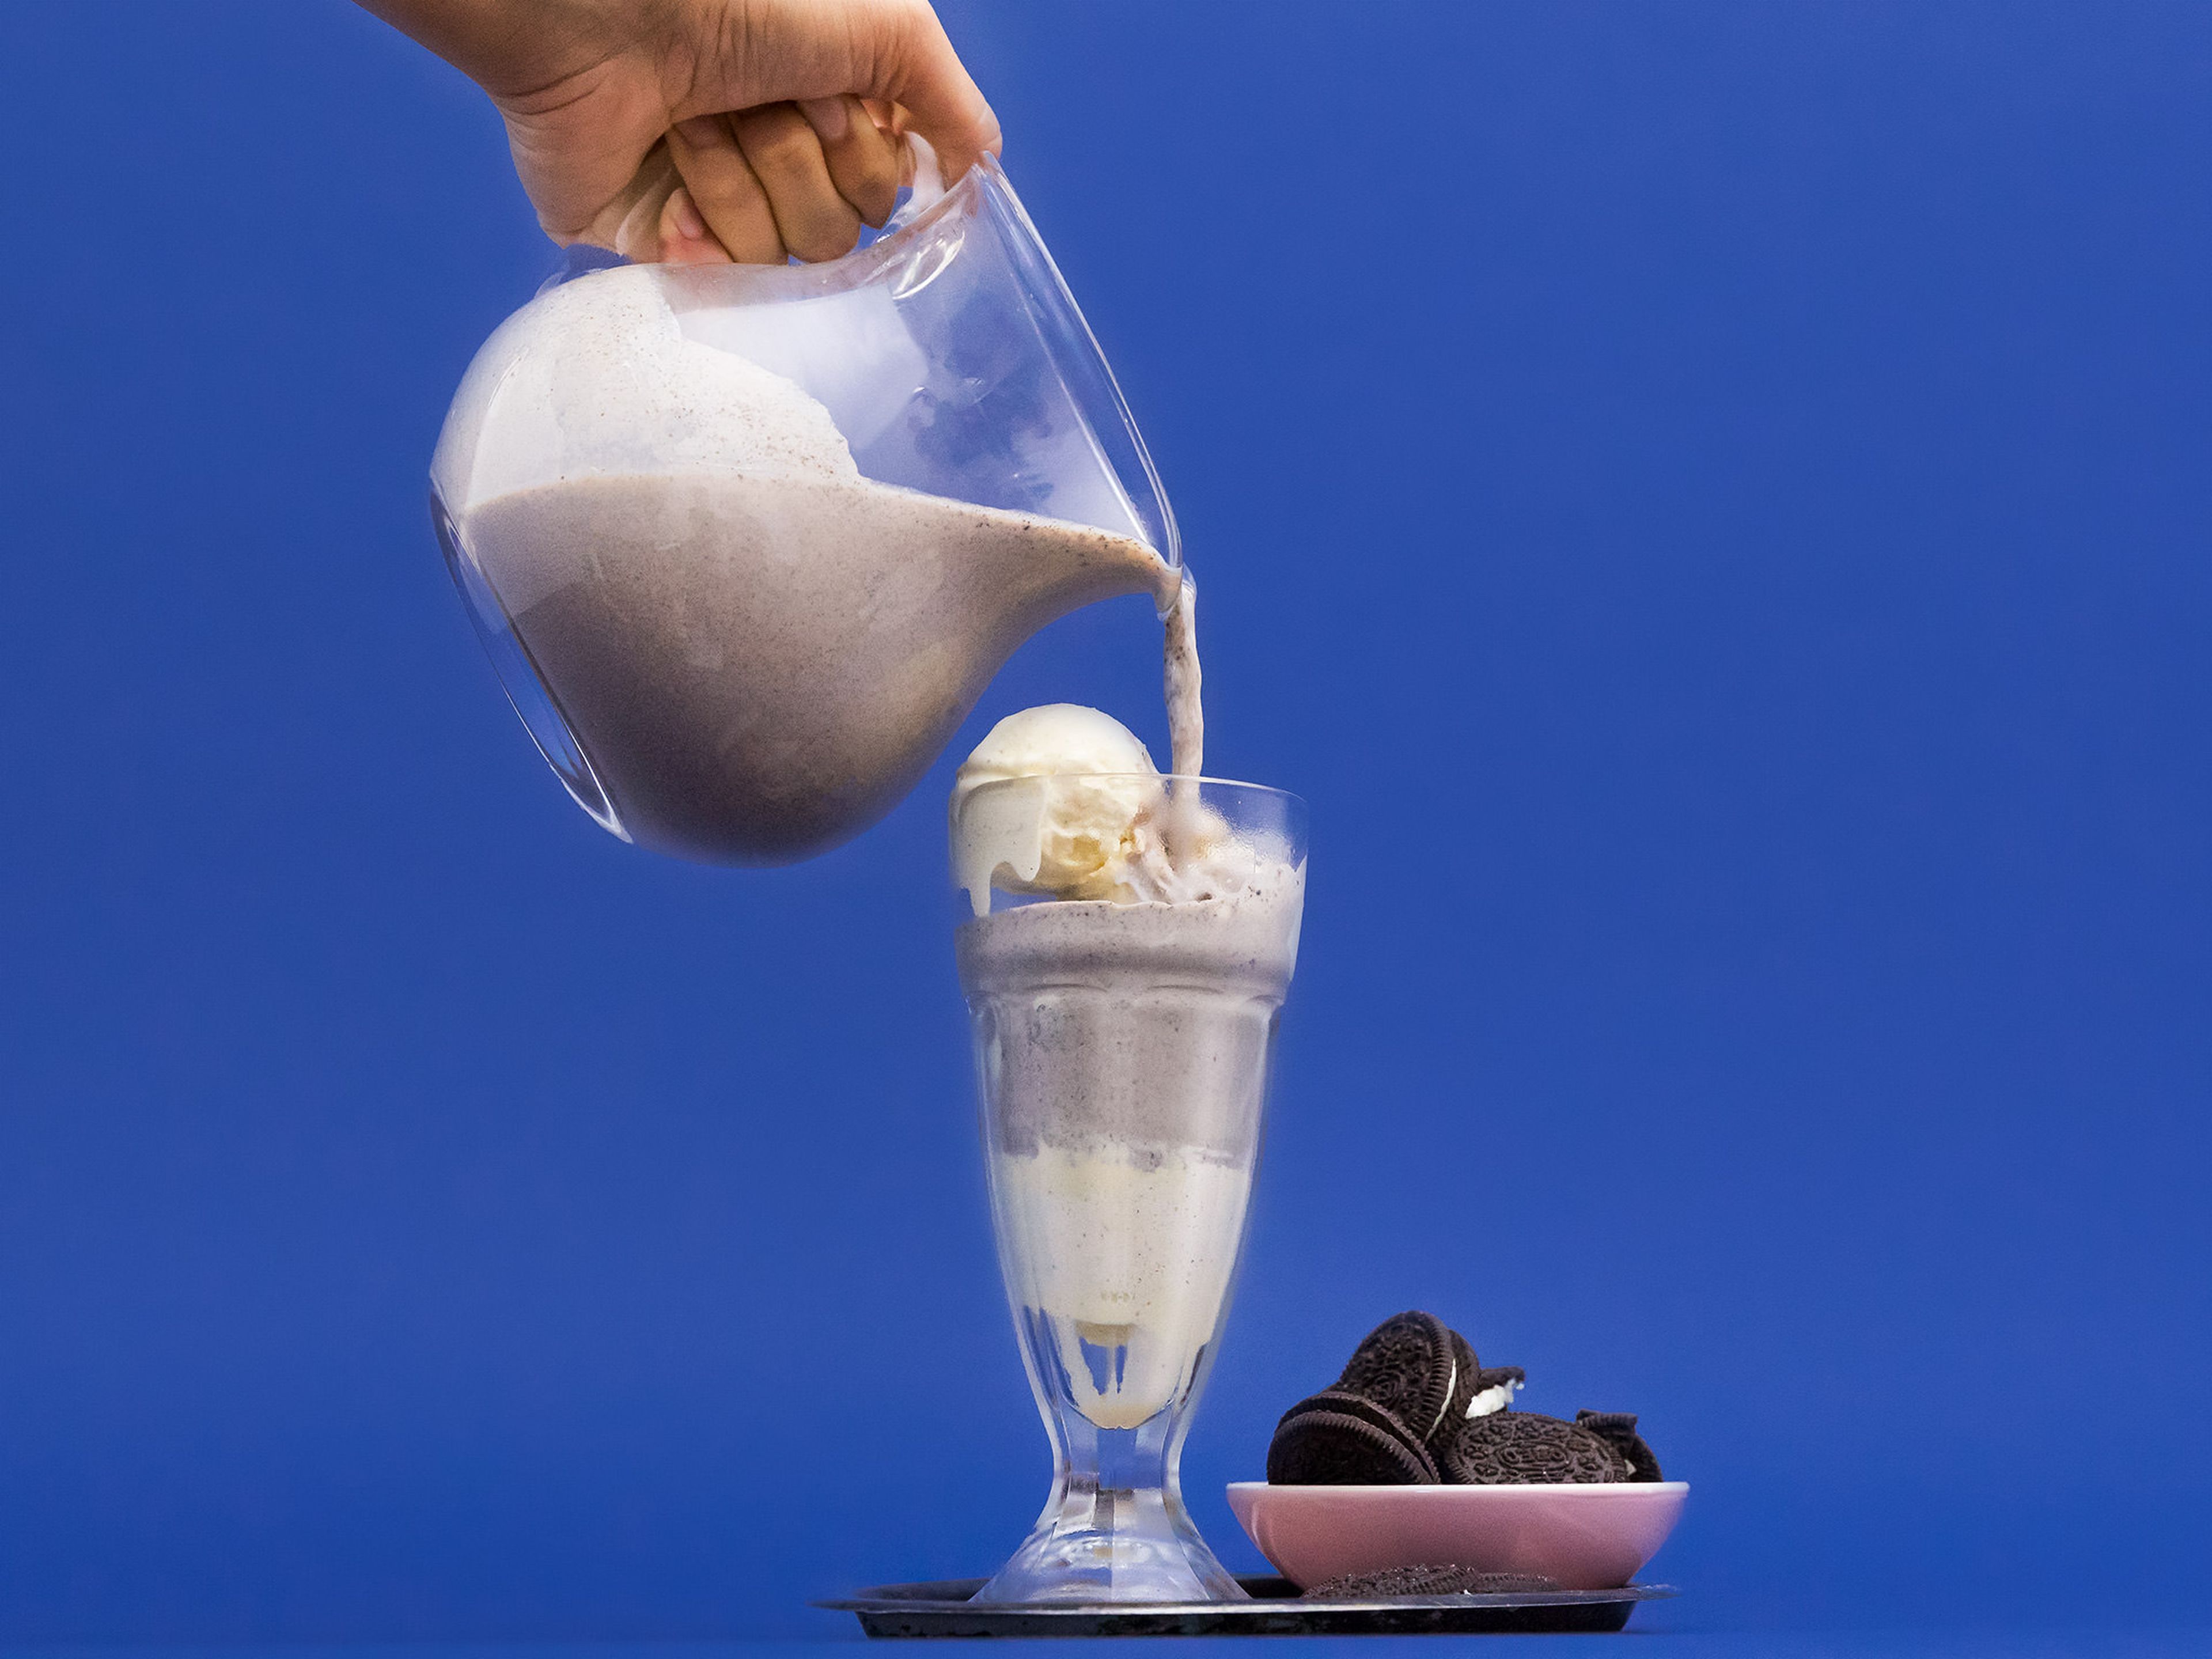 Pour into glasses, garnish each with extra scoops of ice cream and an Oreo cookie for decoration. Enjoy!